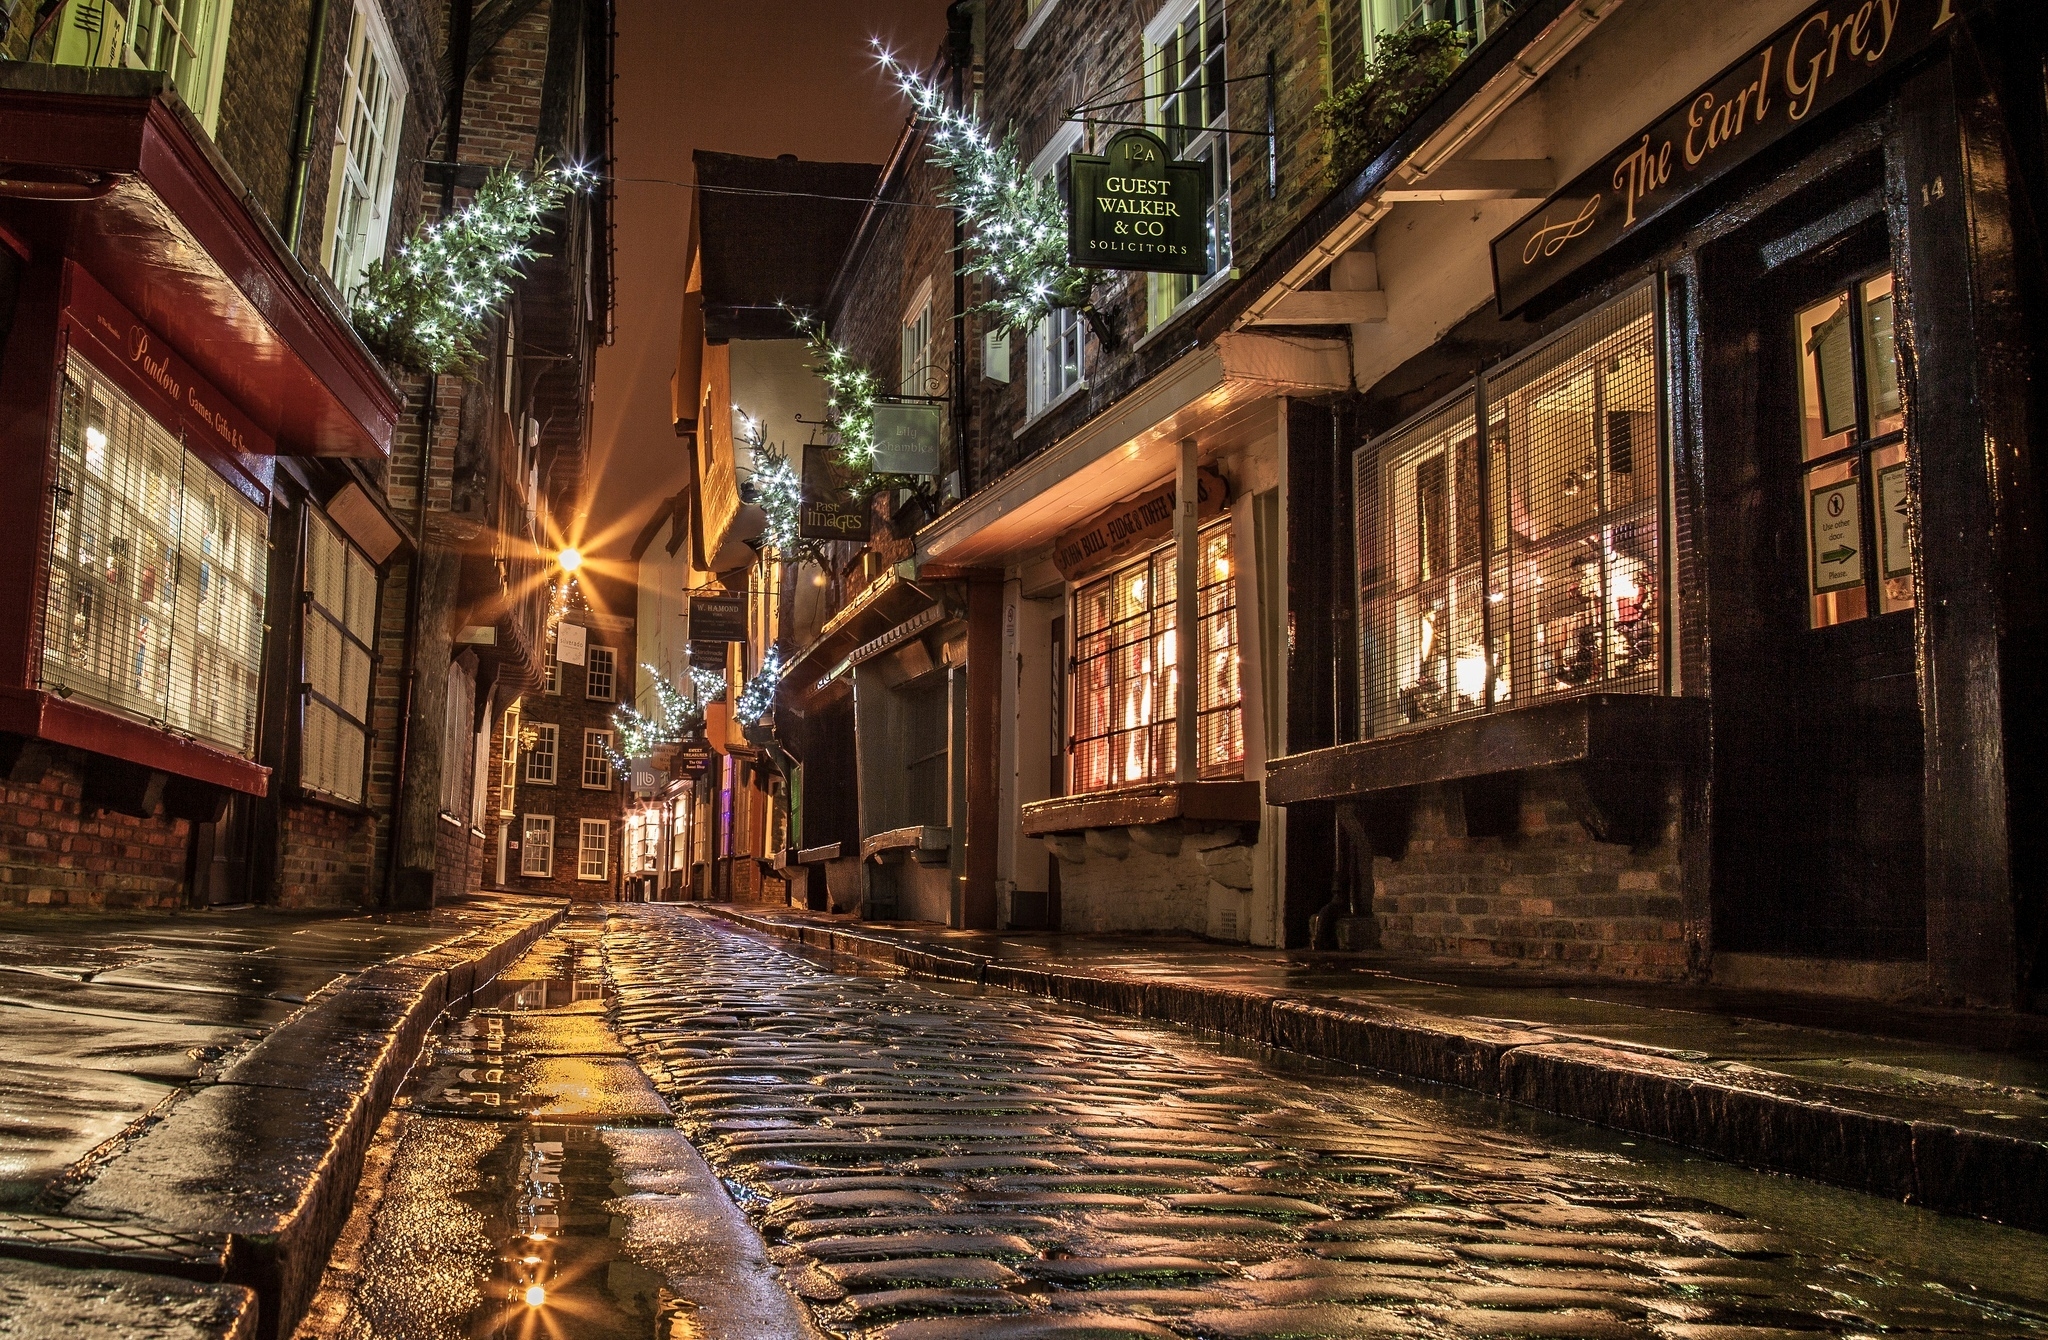 90205 download wallpaper houses, miscellaneous, miscellanea, light, windows, new year, night, shine, road, christmas, evening, street, shops, paving stones, sett, england screensavers and pictures for free